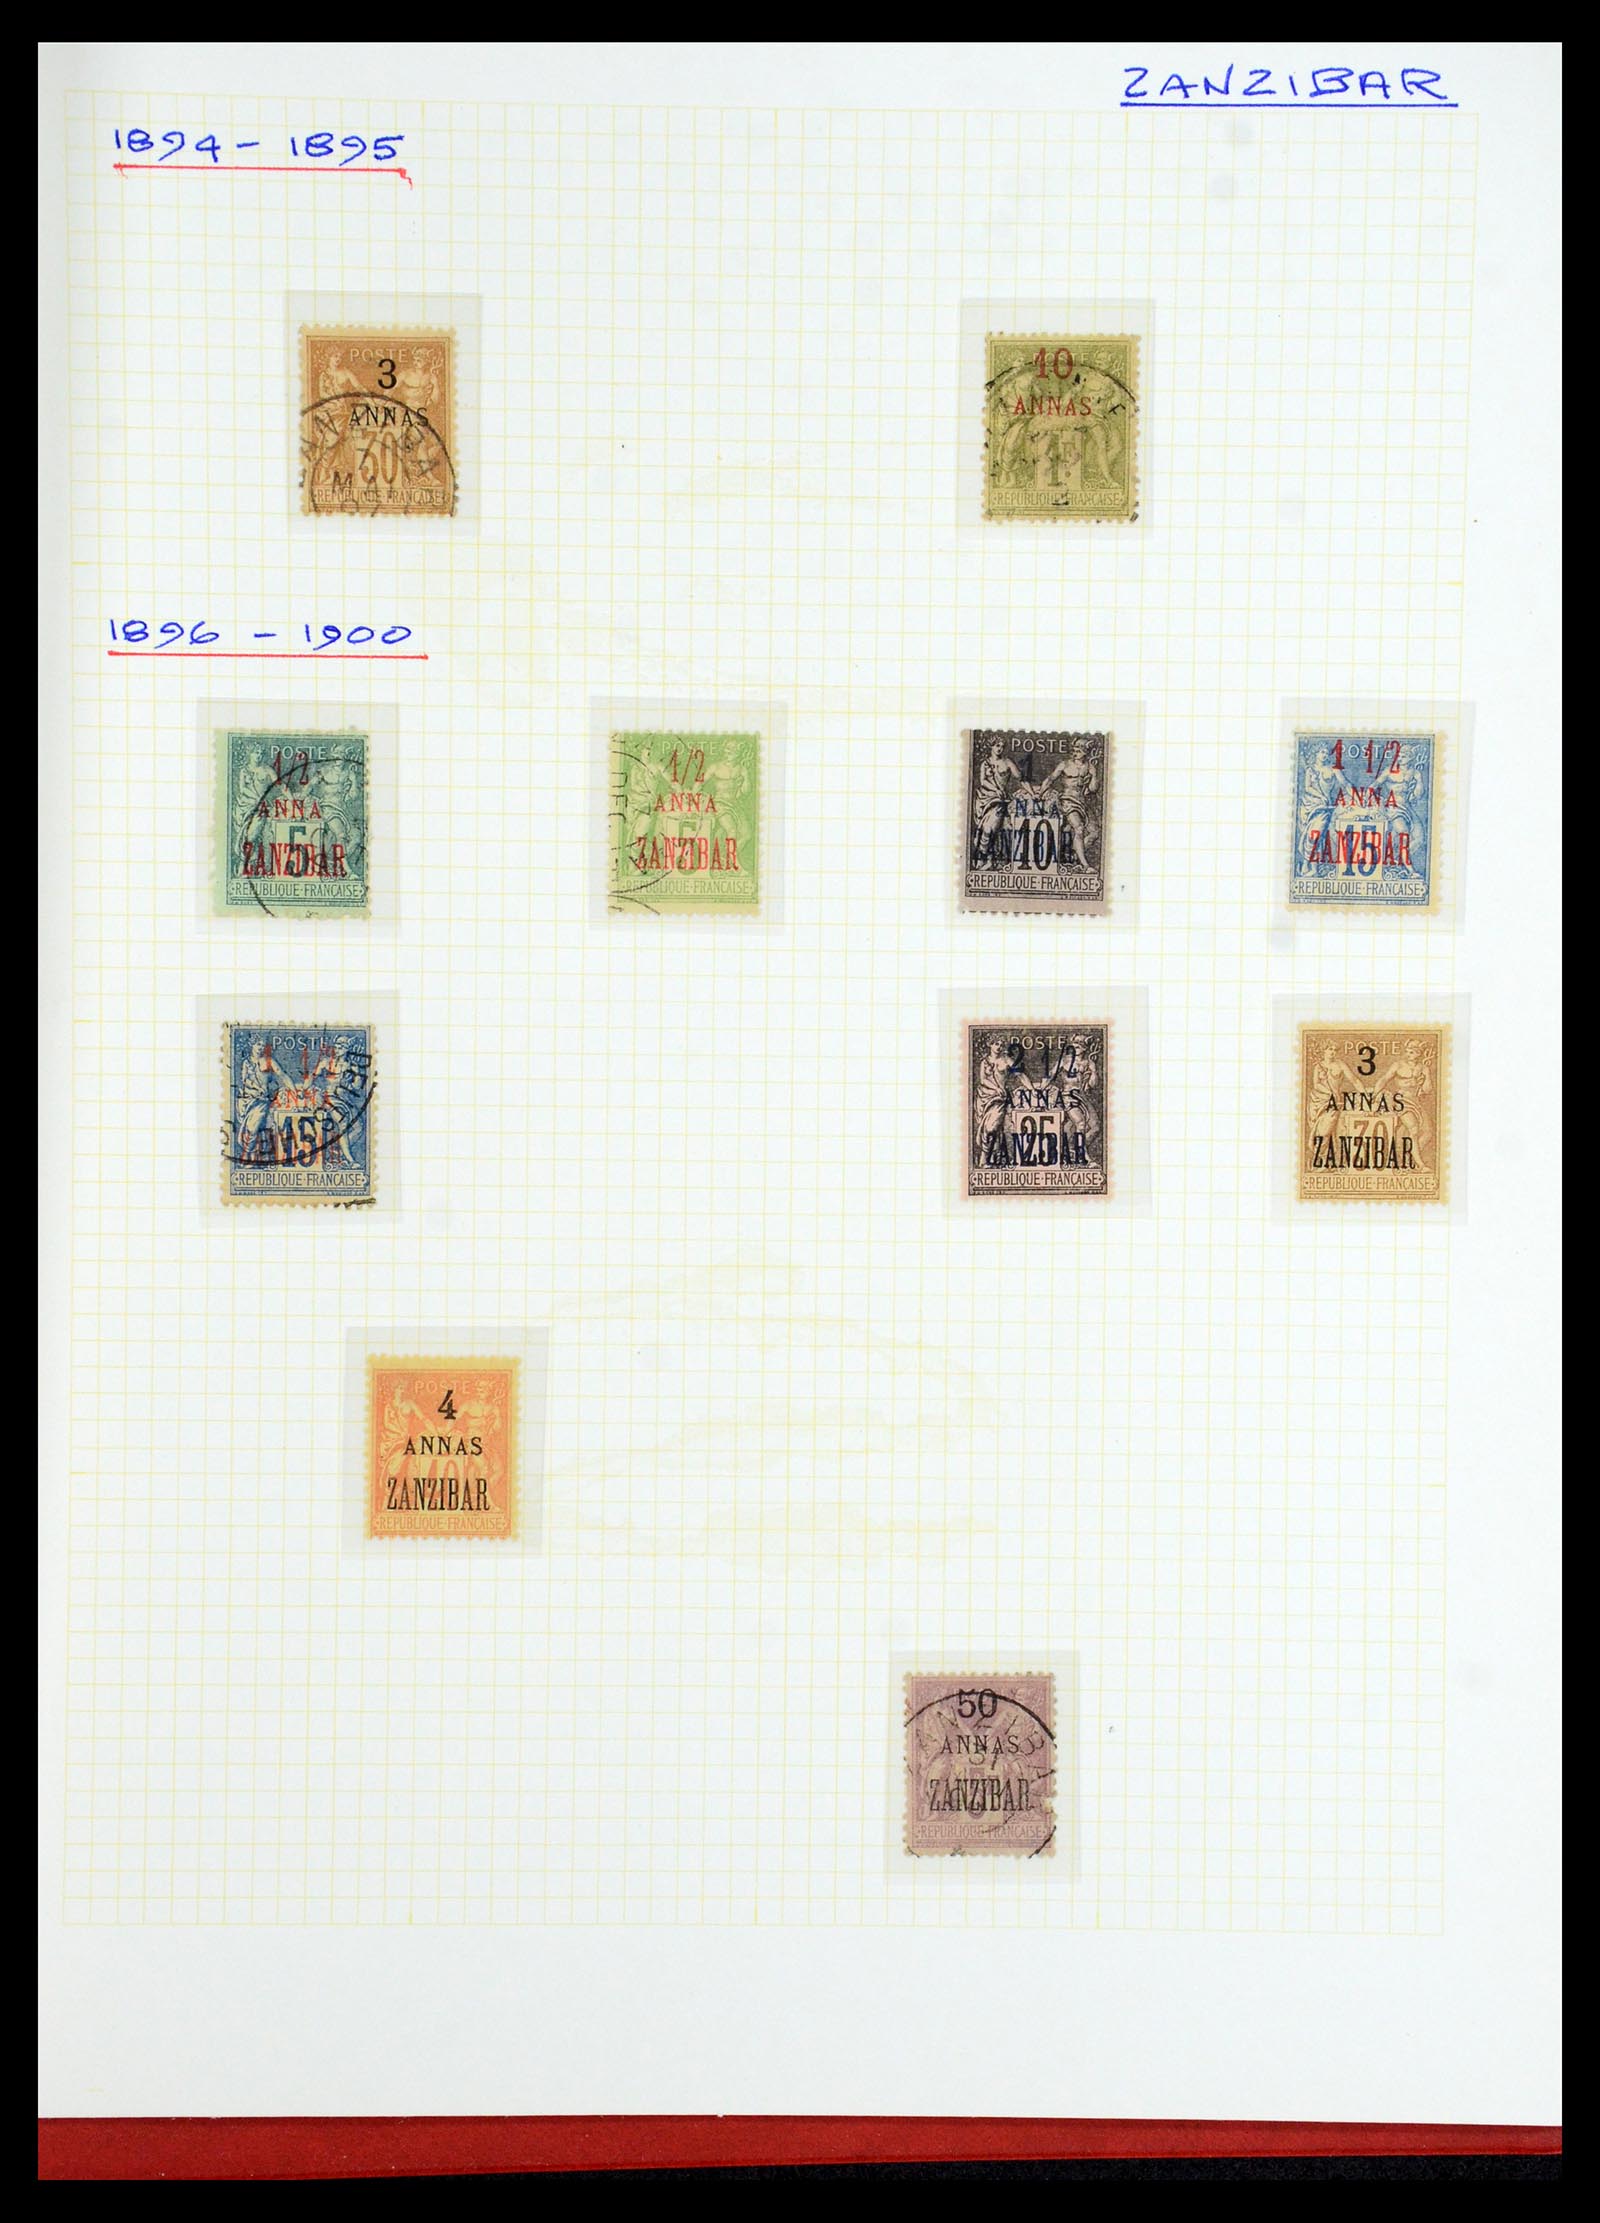 36099 290 - Stamp collection 36099 French coonies 1885-1950.